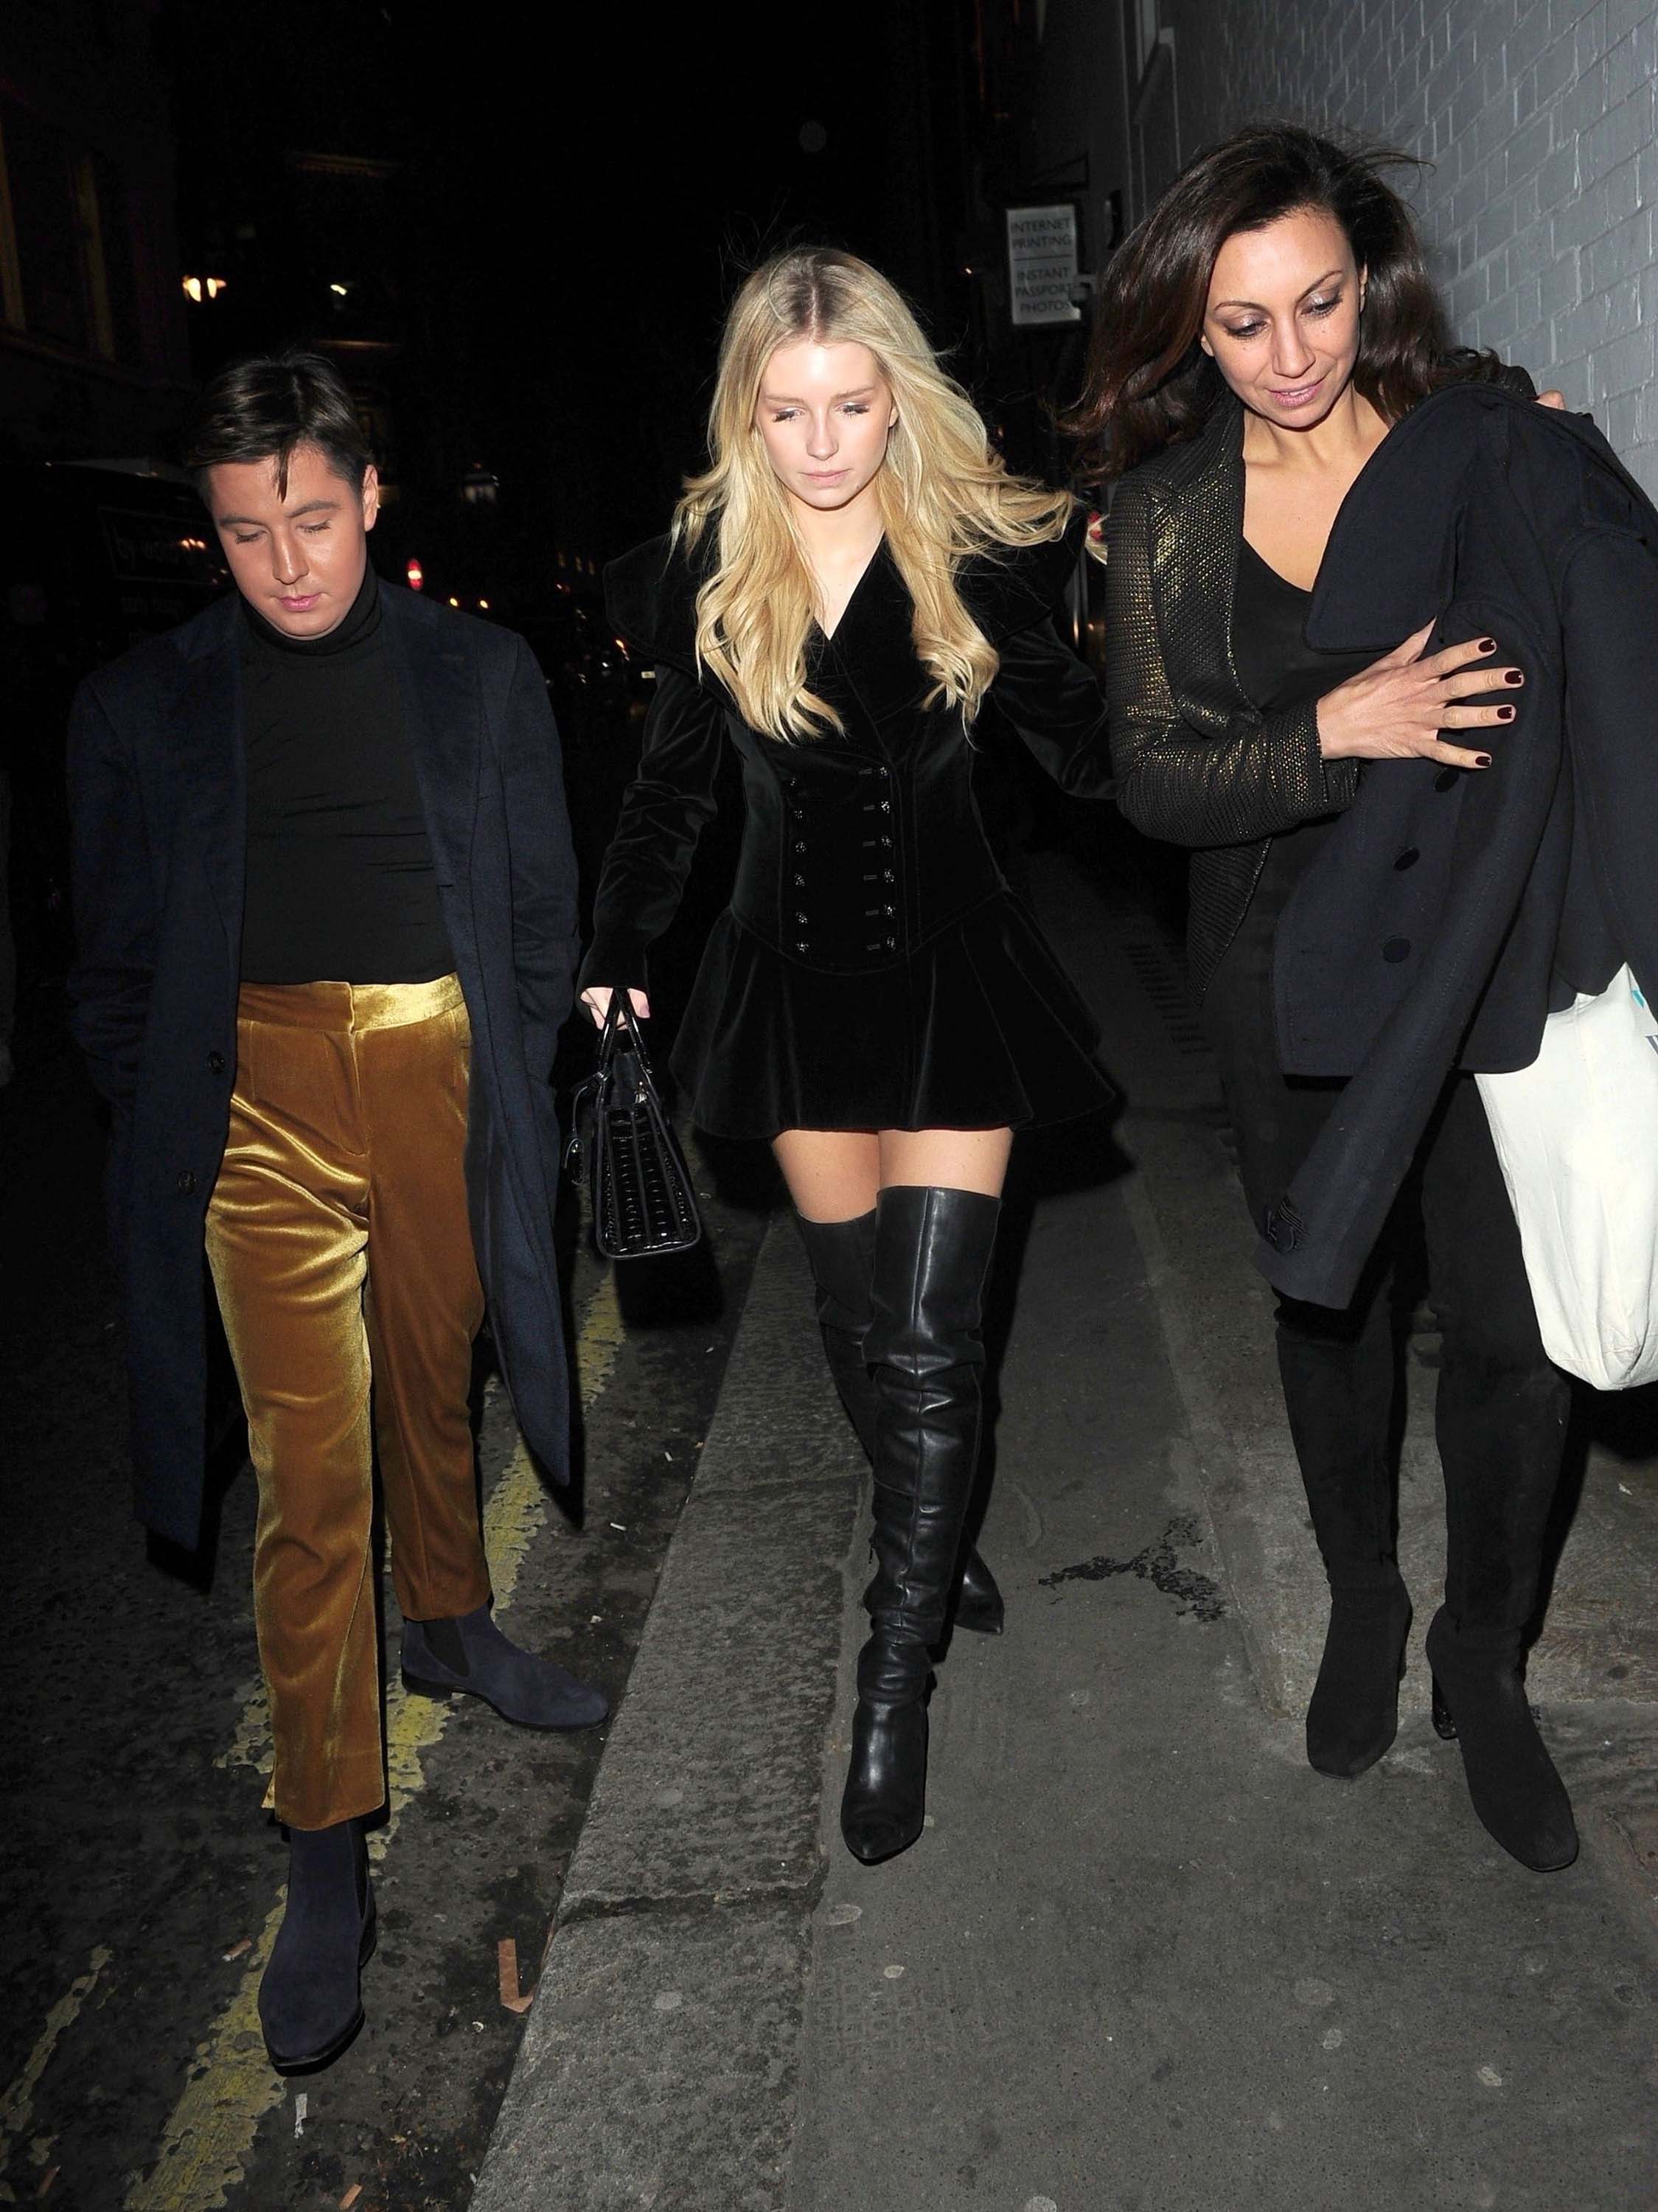 Lottie Moss leaves The Connaught Hotel